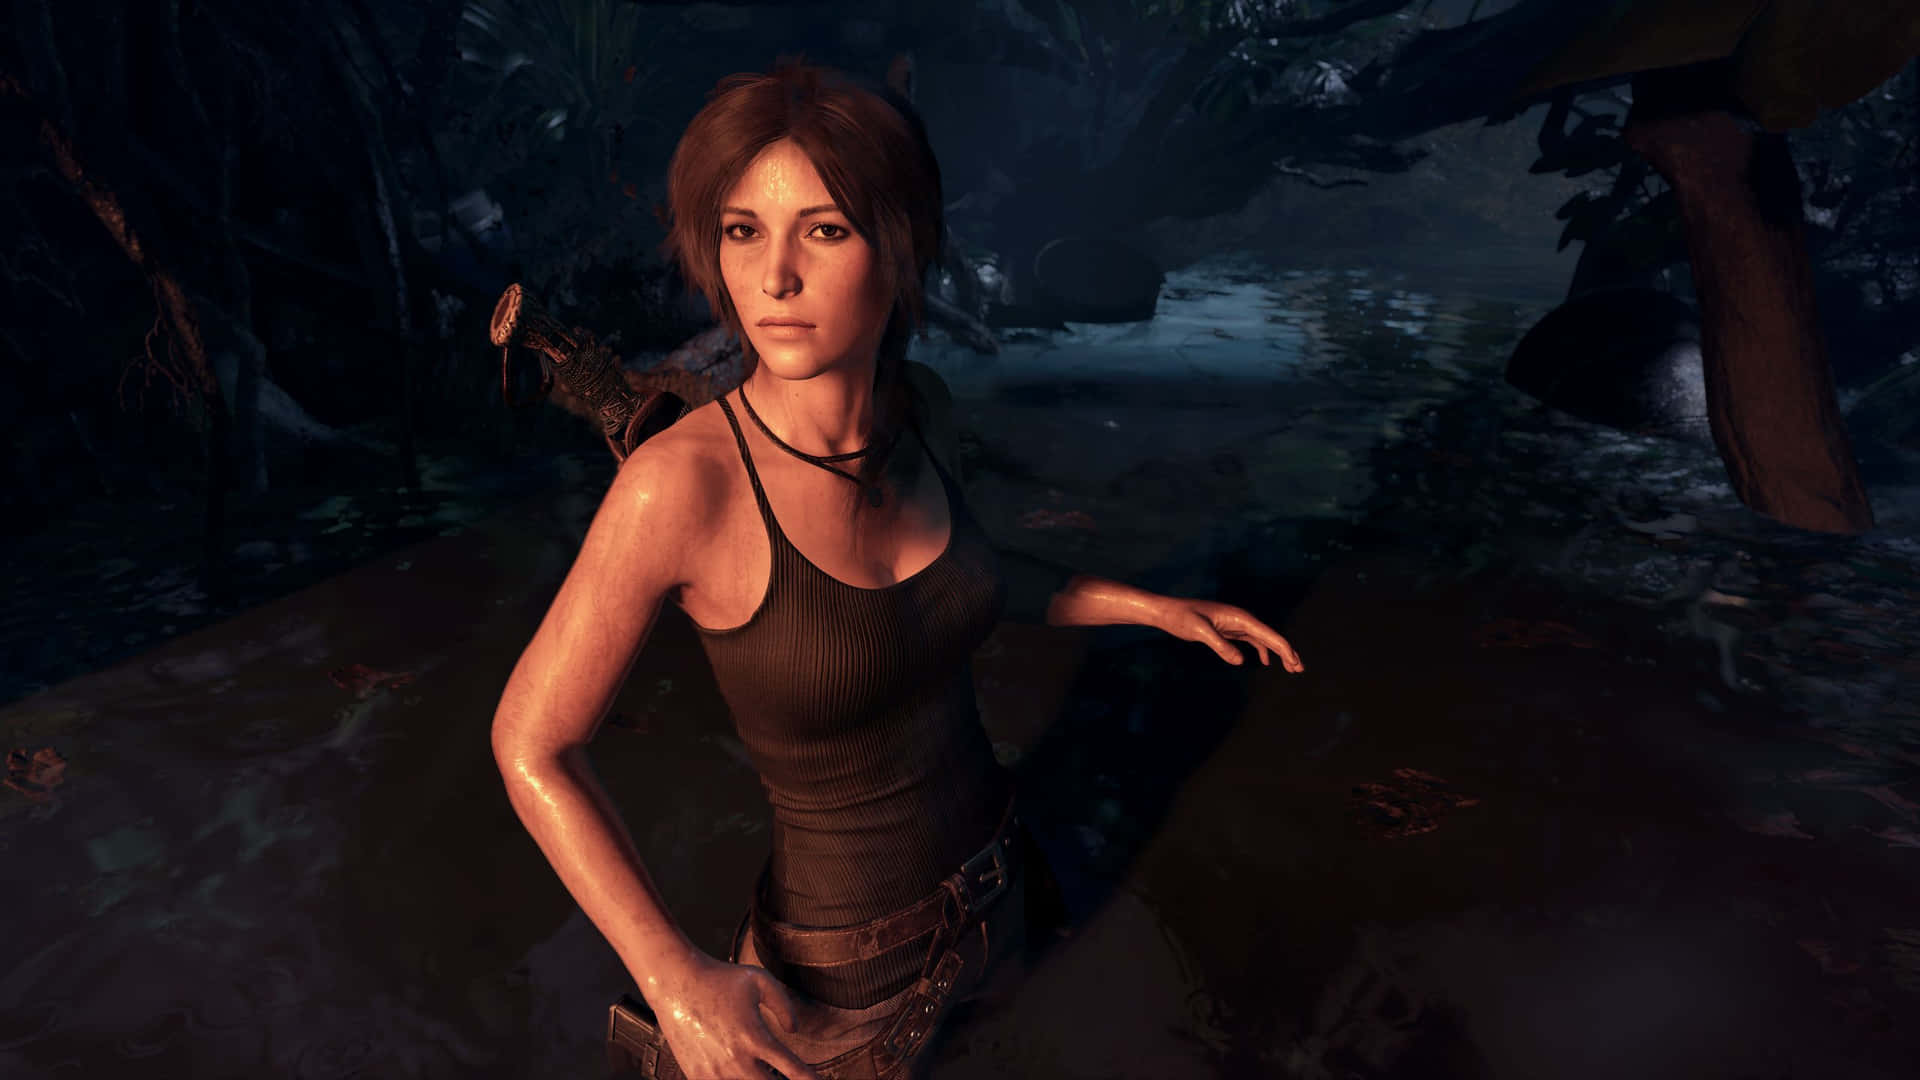 Lara Croft on the Hunt in Shadow of the Tomb Raider Wallpaper